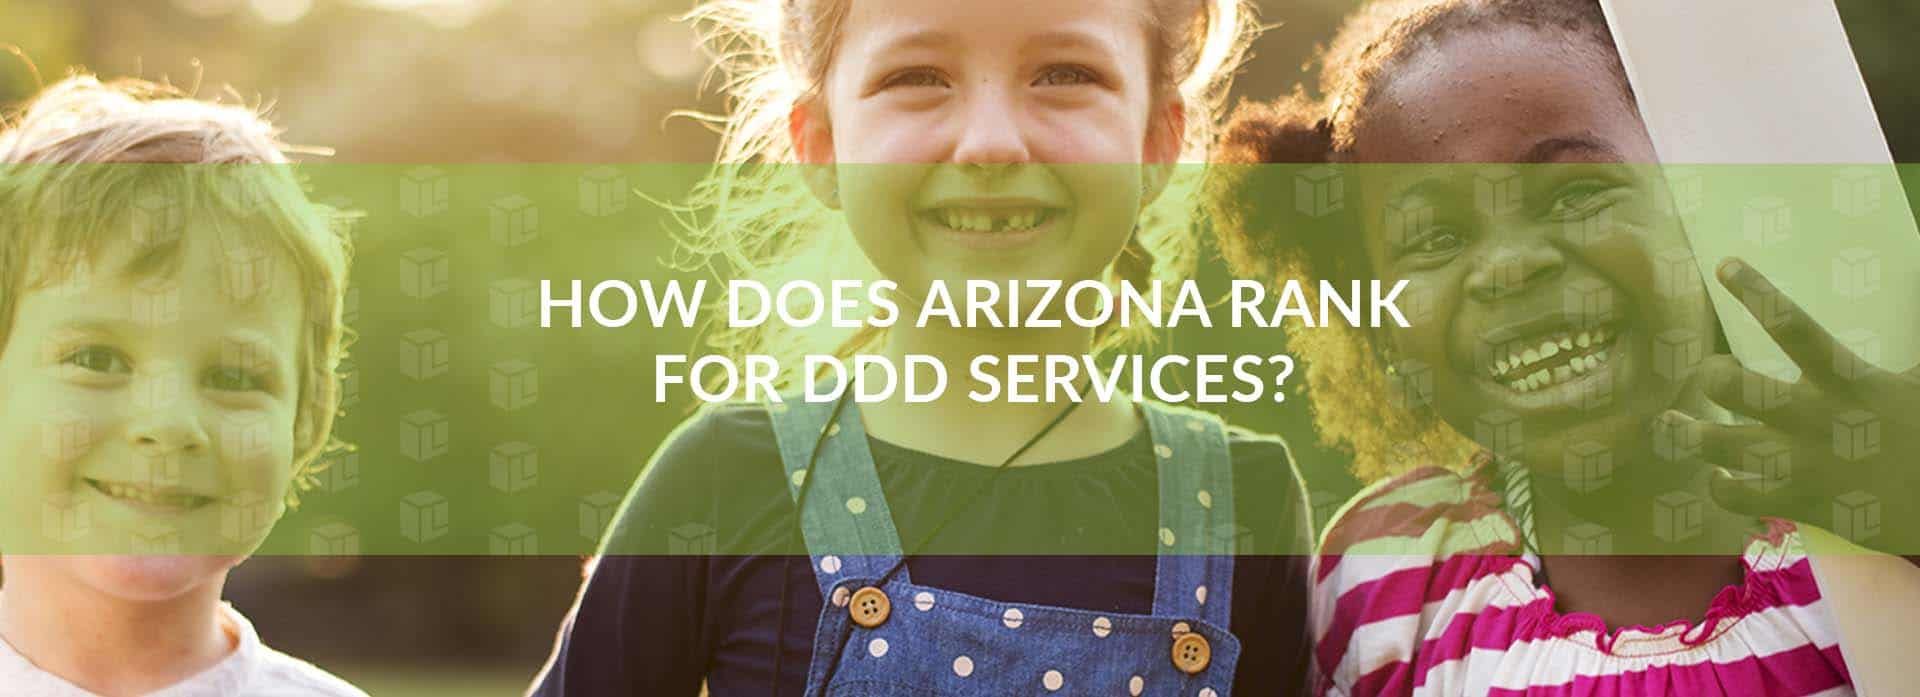 How Does Arizona Rank For DDD Services How Does Arizona Rank For DDD Services How Does Arizona Rank For DDD Services How Does Arizona Rank For DDD Services